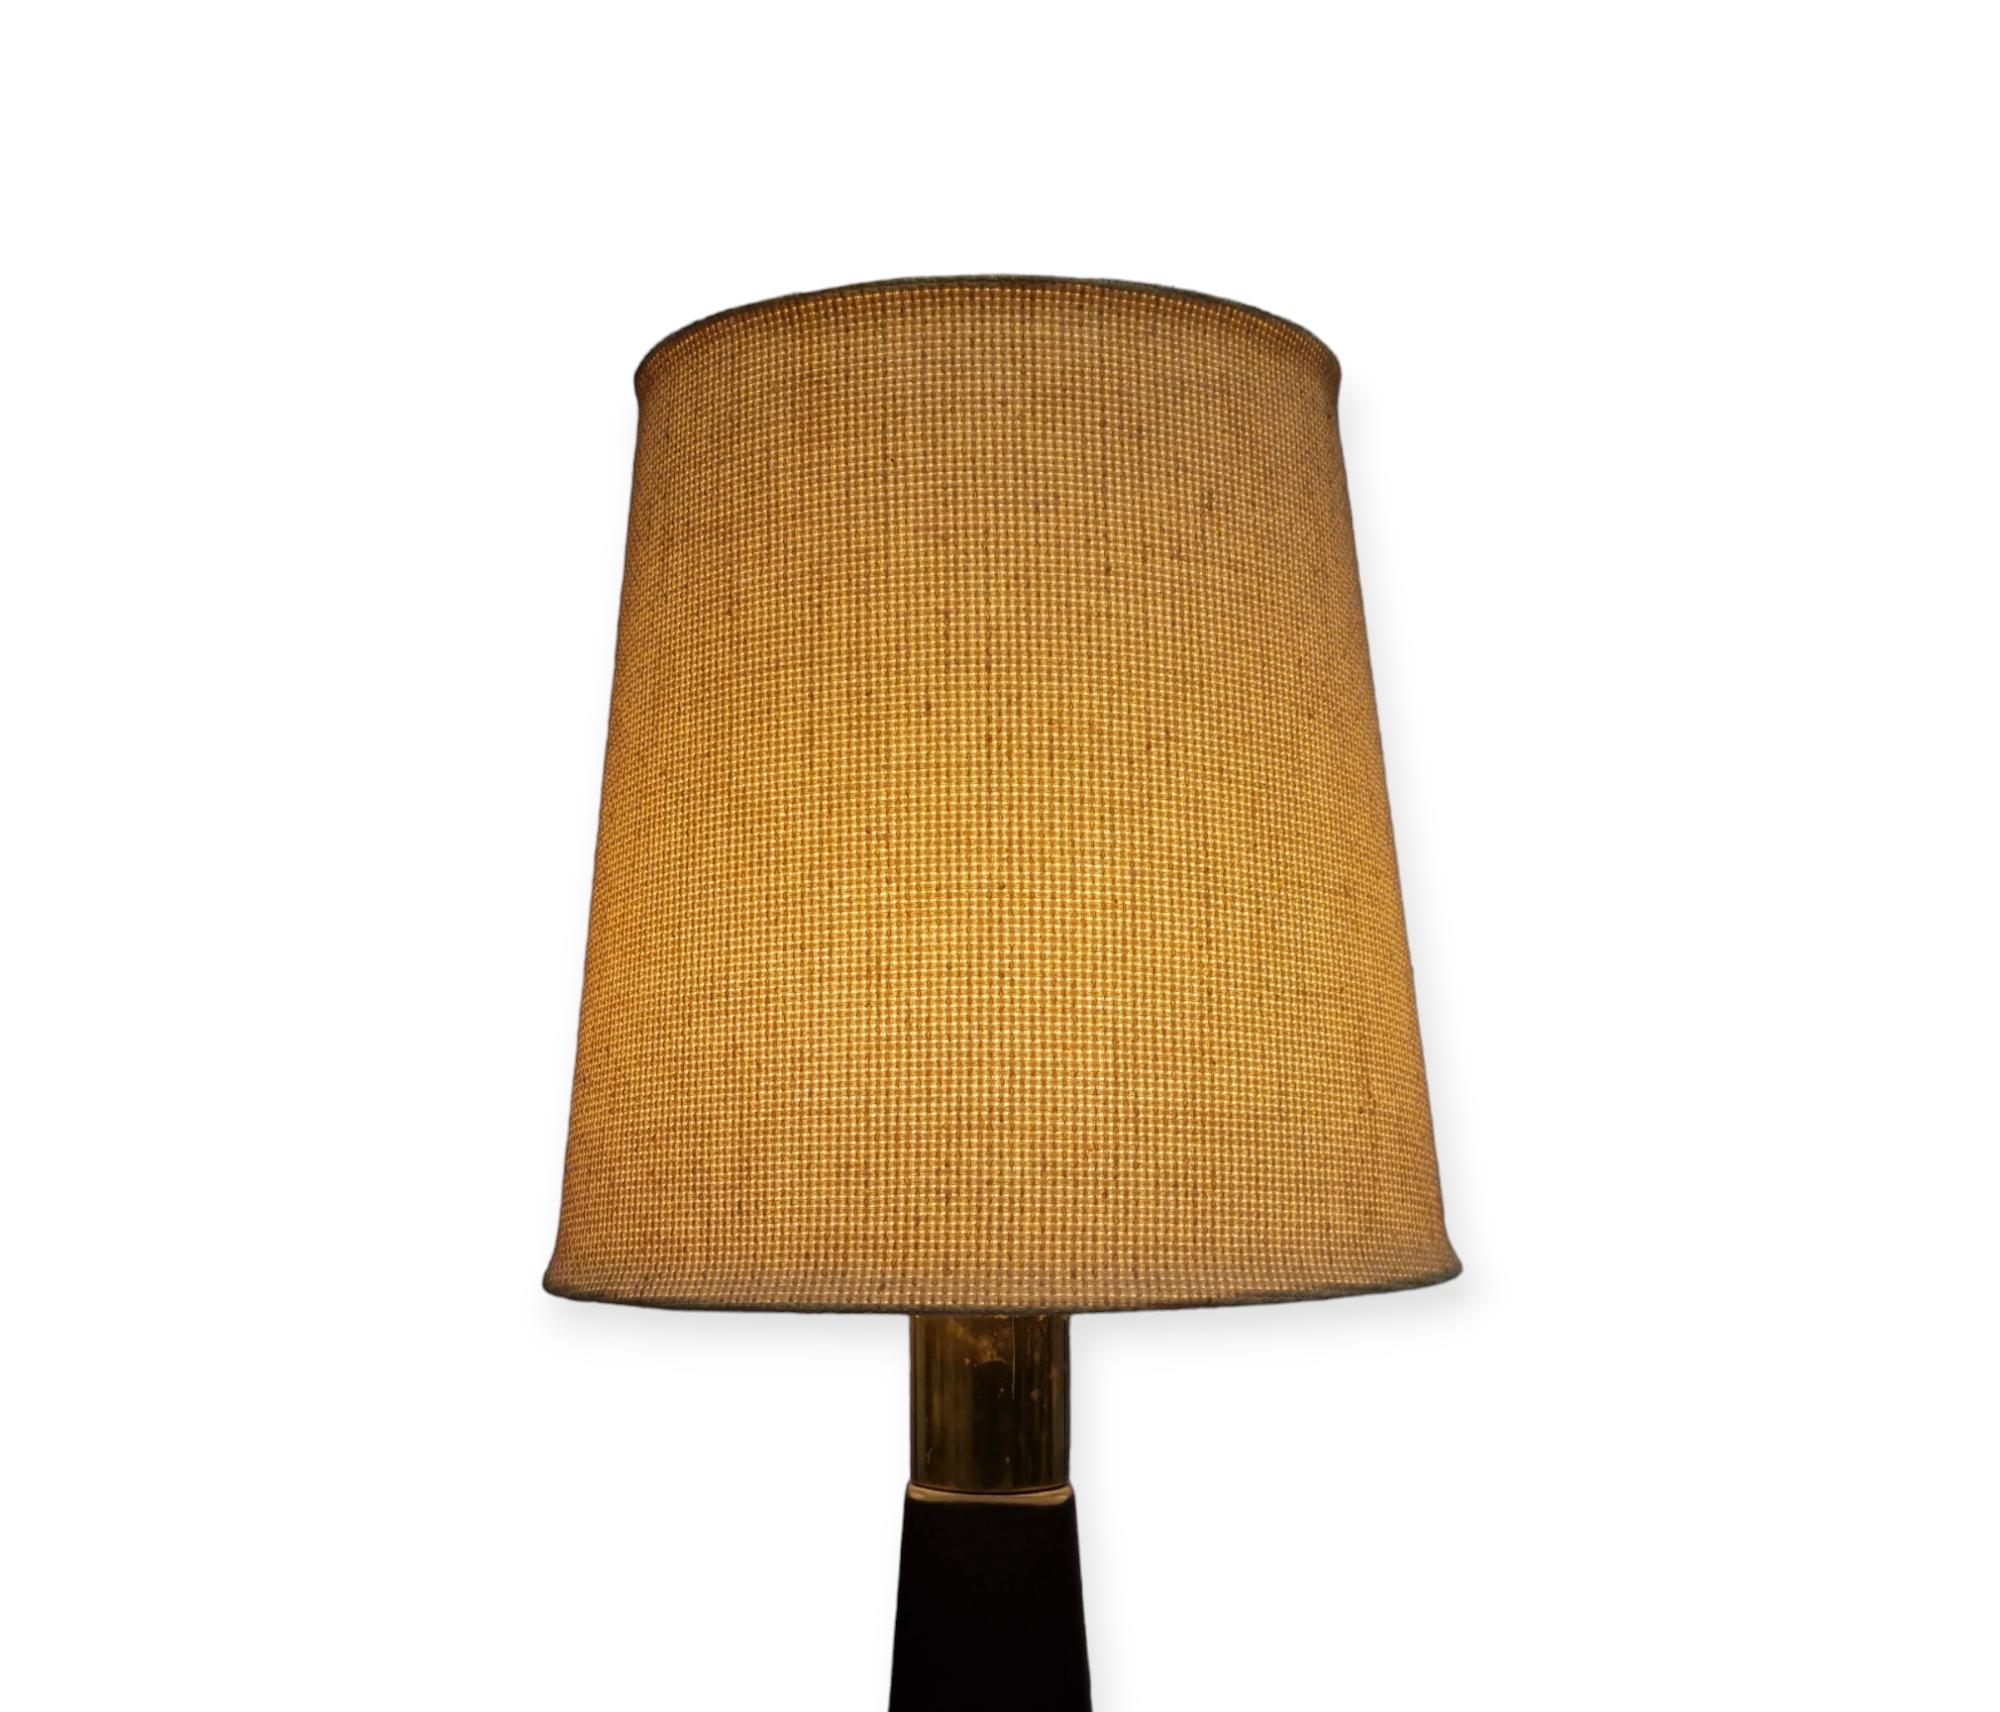 Mid-20th Century Lisa Johansson-Papé Table Lamp 46-186 LJP in Leather and Linen, Orno For Sale